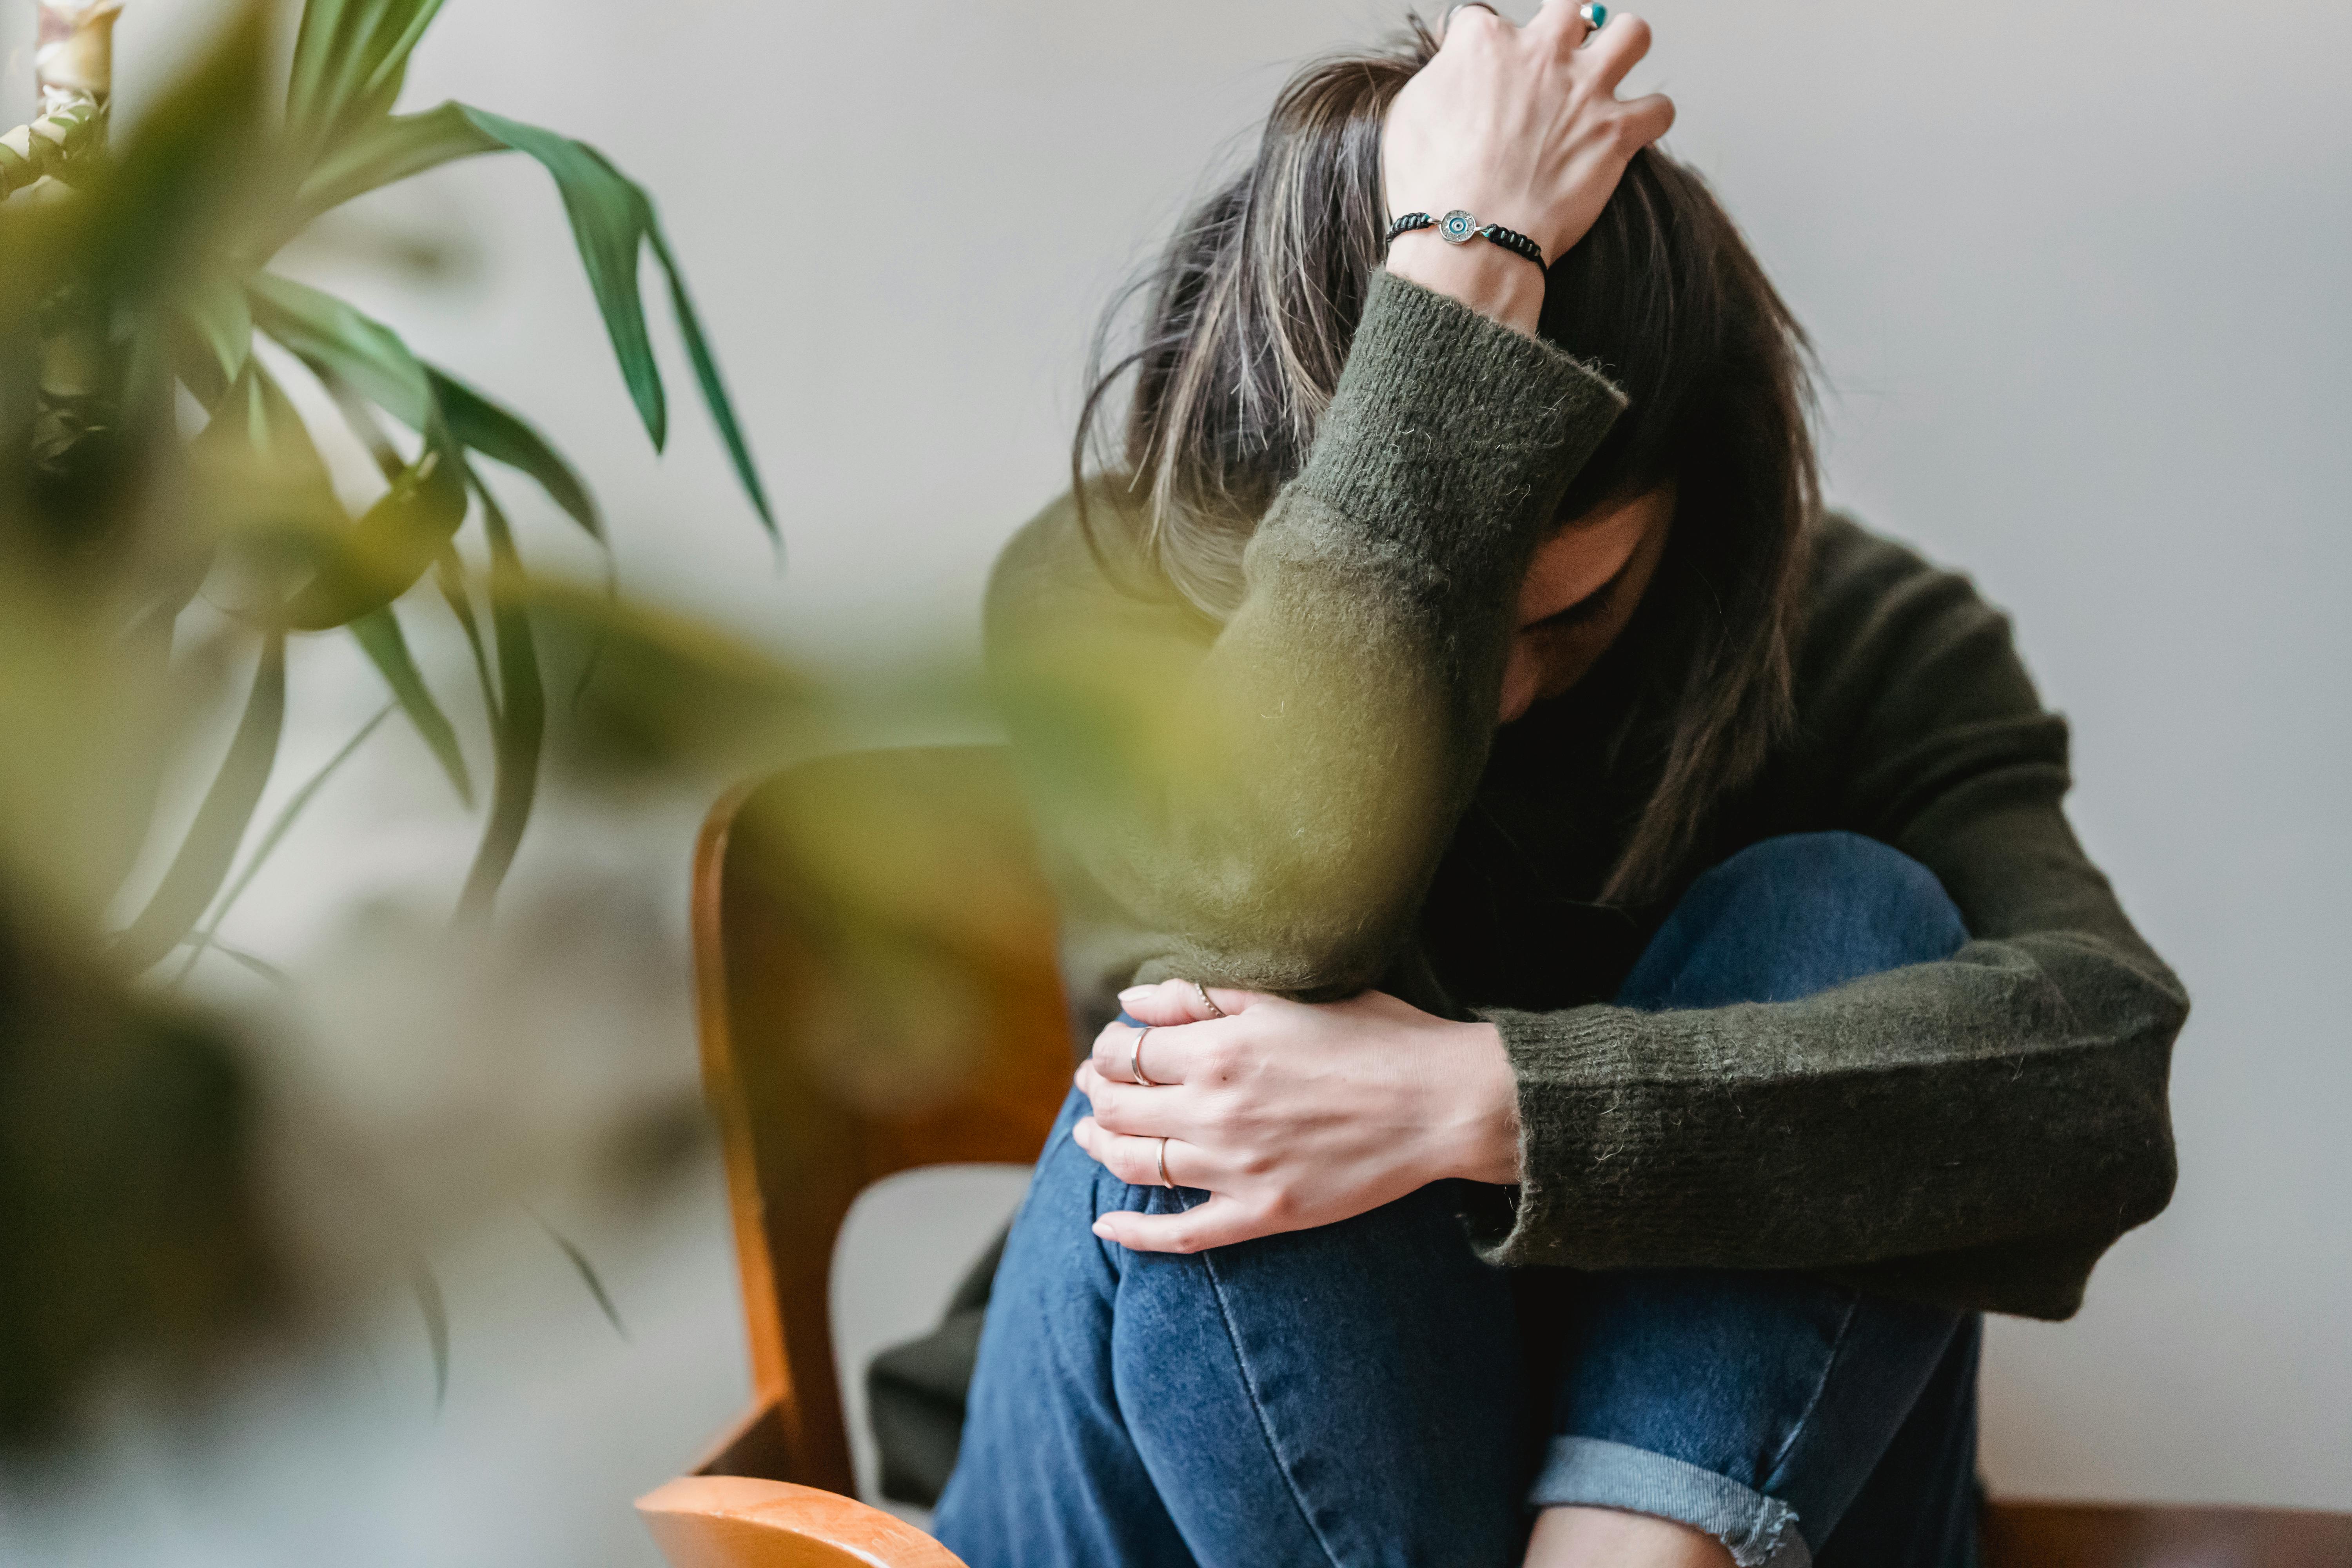 An upset woman sitting on chair | Source: Pexels